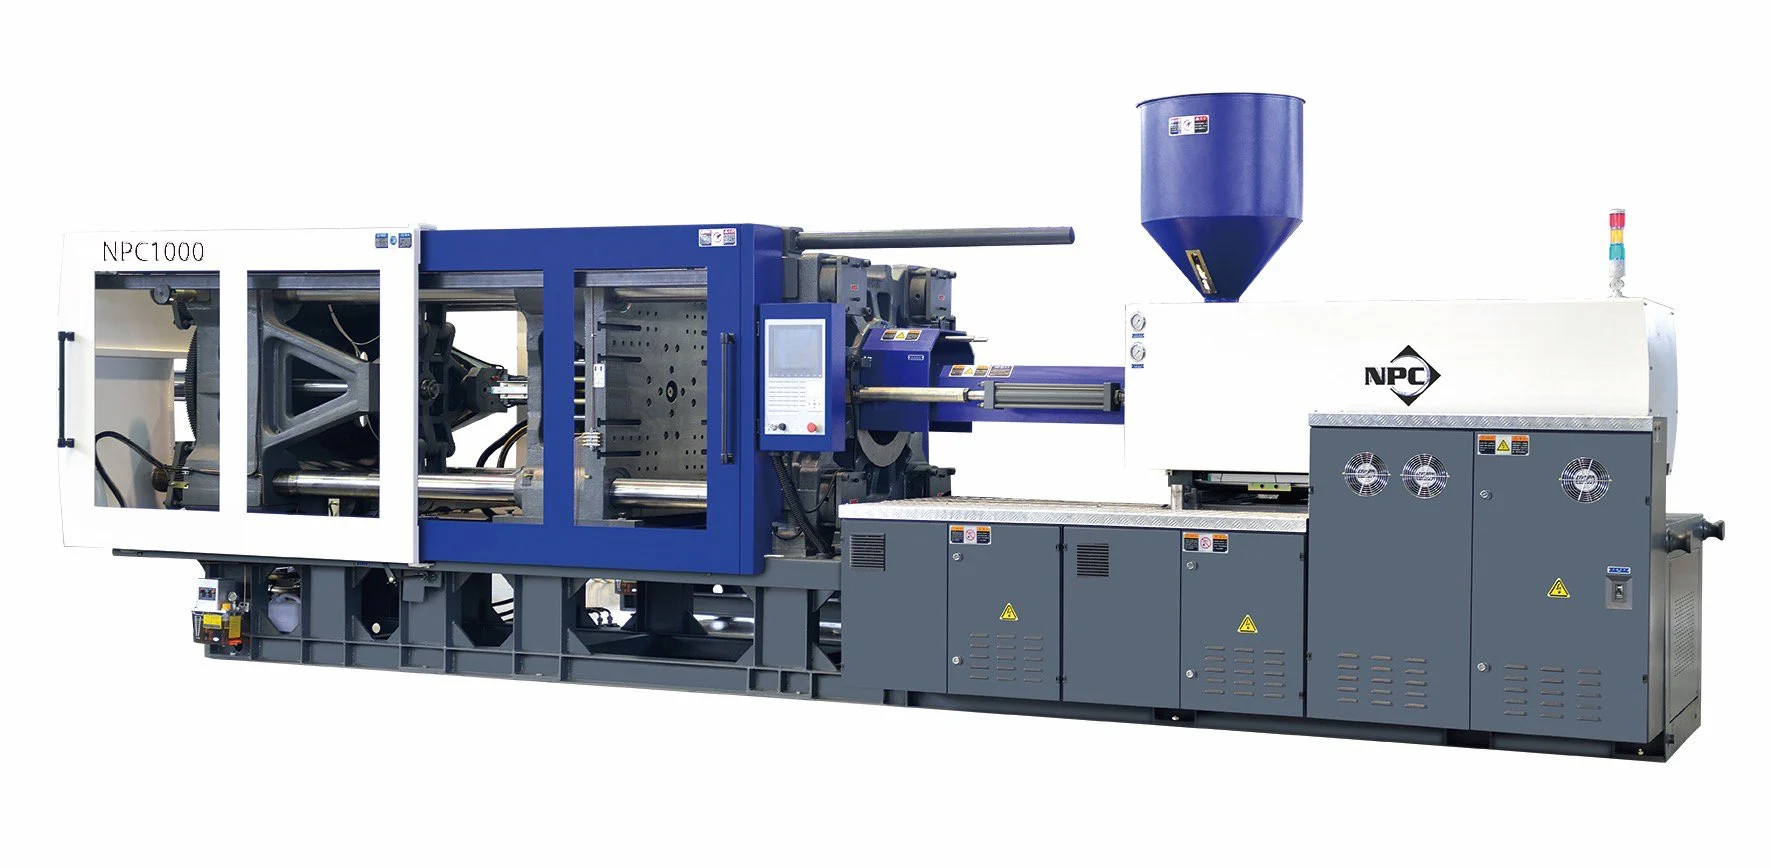 How does NPC machinery affect injection molding?